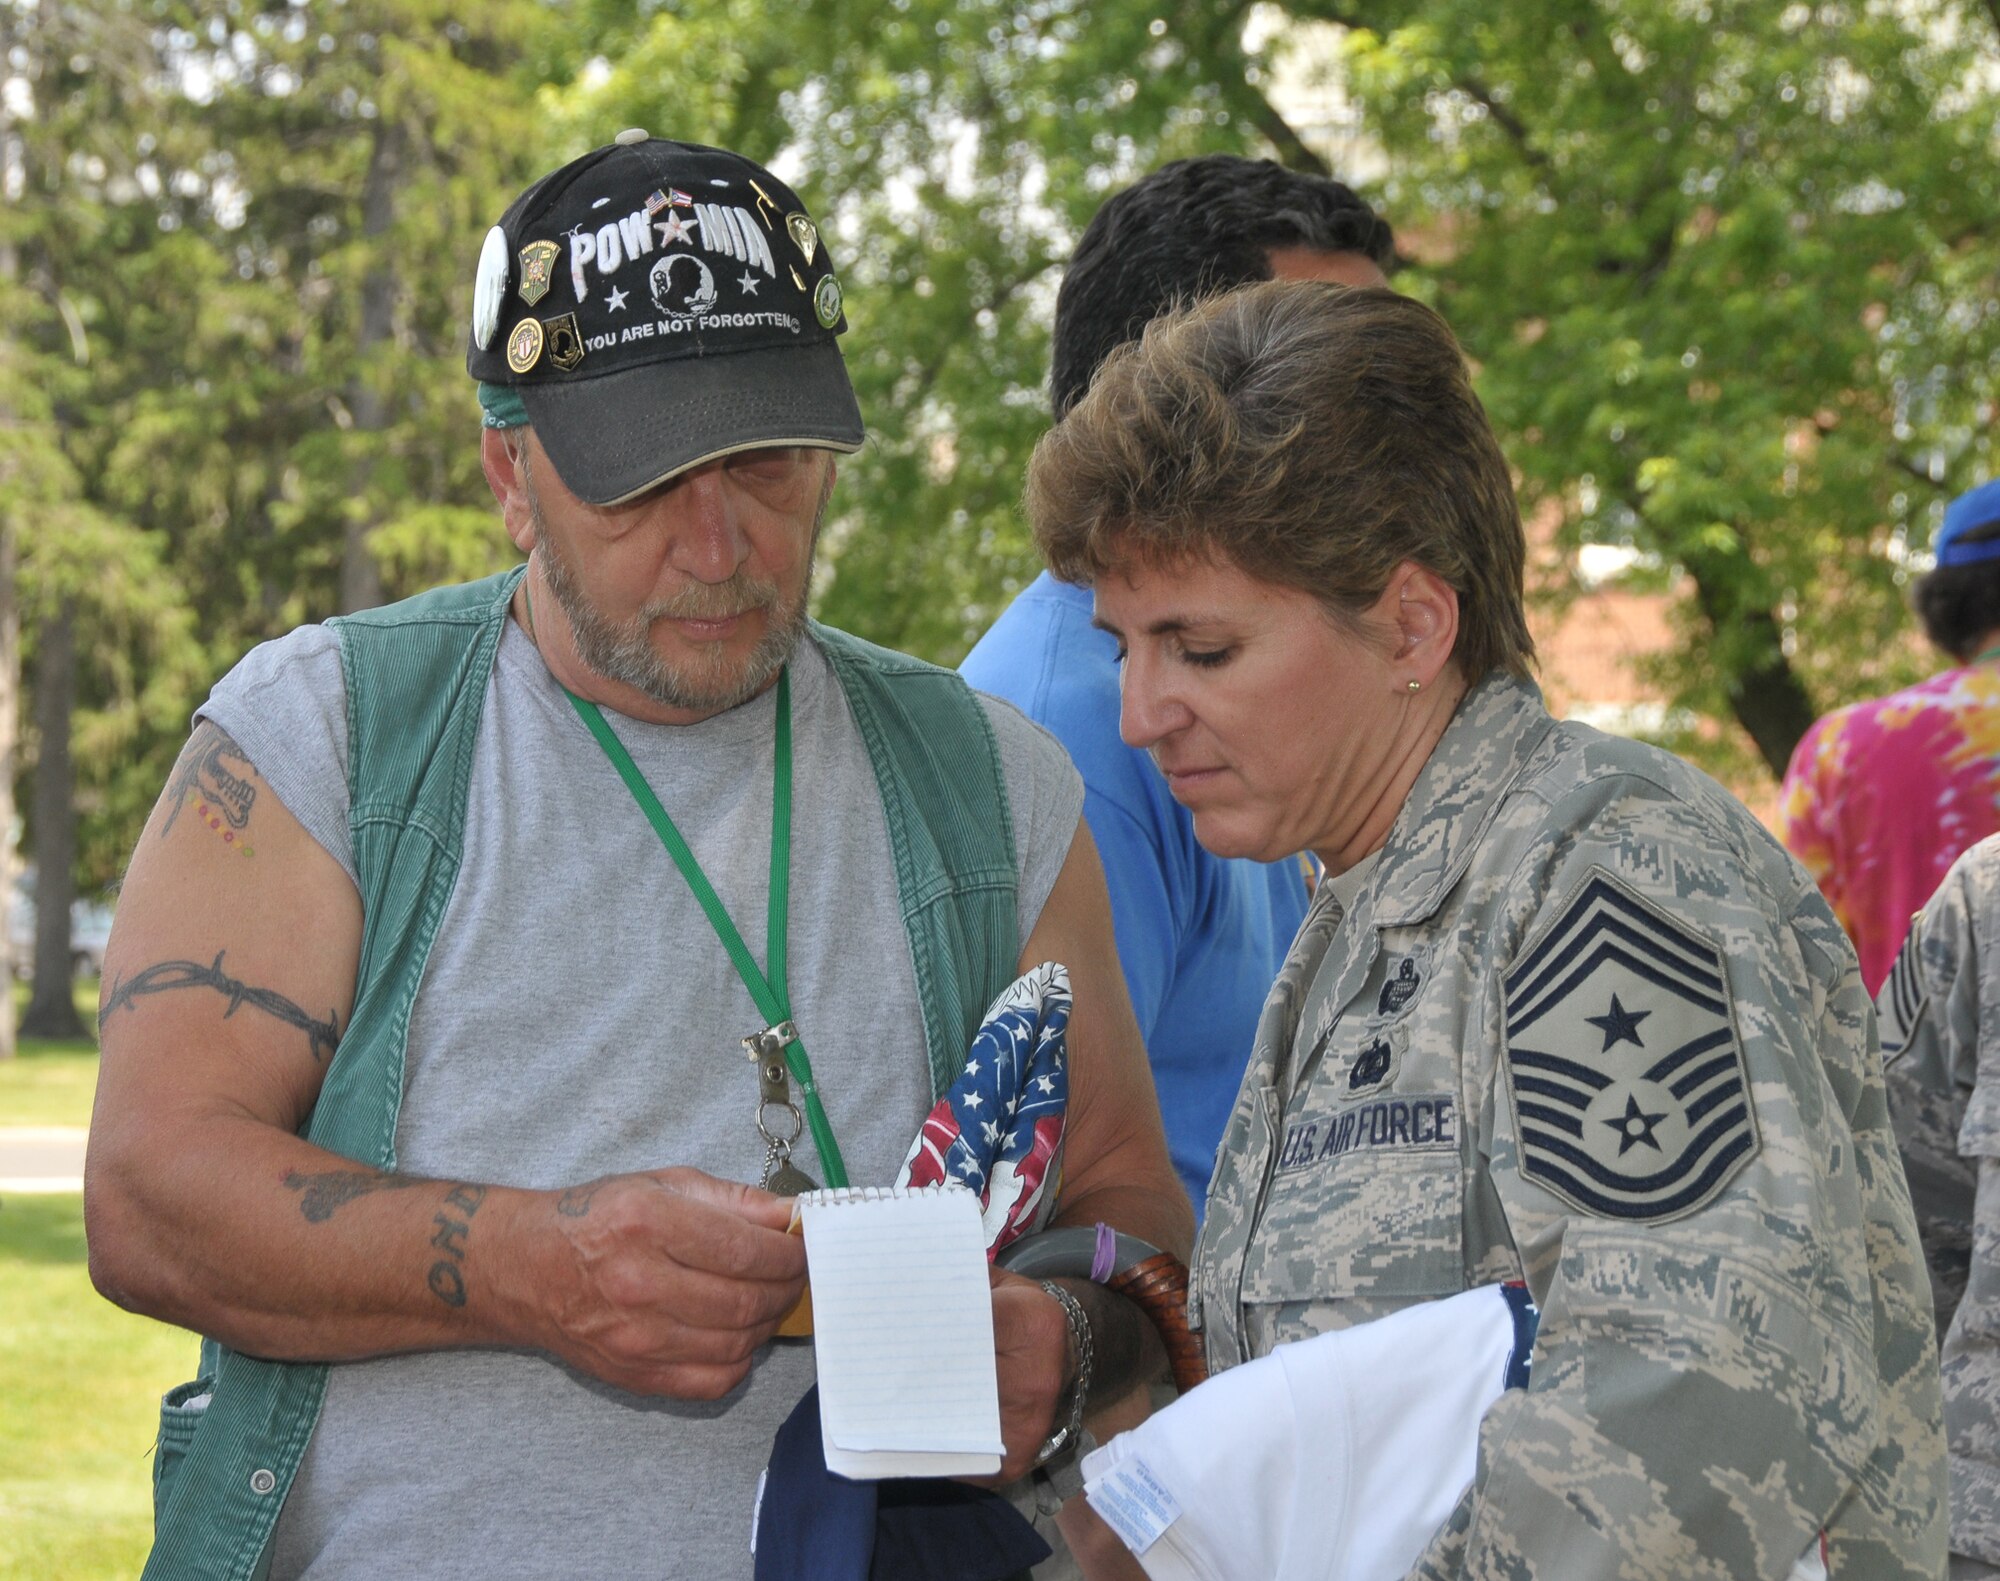 WRIGHT-PATTERSON AIR FORCE BASE, Ohio – Chief Master Sgt. Peri Rogowski, 445th Airlift Wing Command Chief, talks with a VA resident during the annual VA picnic June 6, 2009, at the Veterans Affairs Medical Center in Dayton, Ohio. Reservists from the 445th Airlift wing support the event every year and have the distinct honor of working with the Air Force Sergeants Association Kittyhawk Chapter 751 at the VA. (Air Force photo/Mr. Bill Richard)